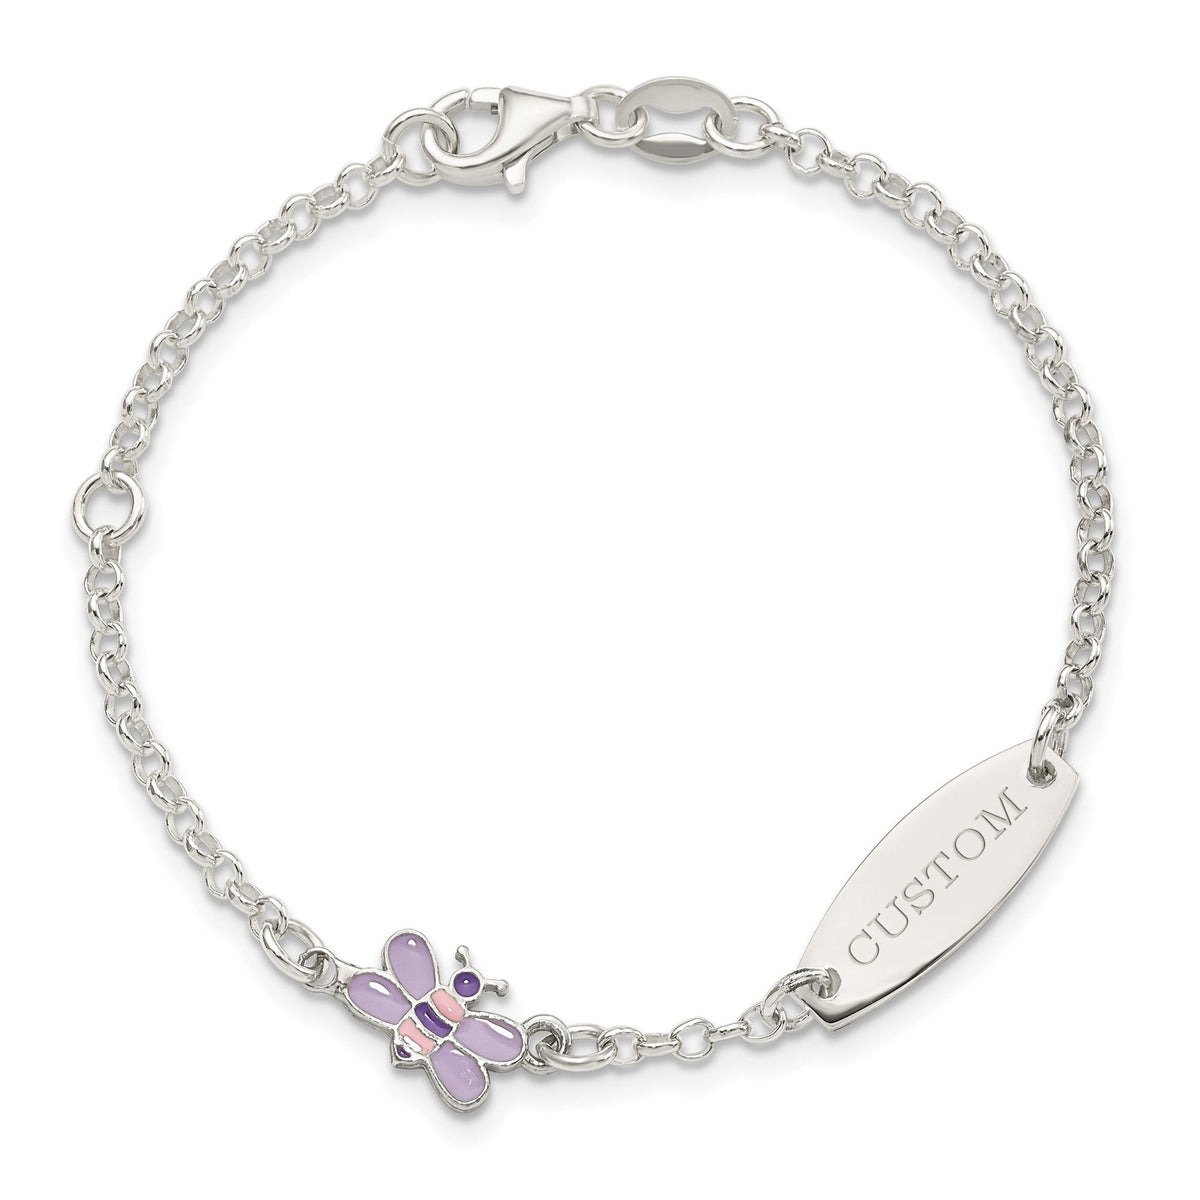 Children's Sterling Silver Personalized ID Bracelet with Butterfly 5 inches w/ 1inch Ext ( 6 Characters)  9 months Old - 3 Years Old